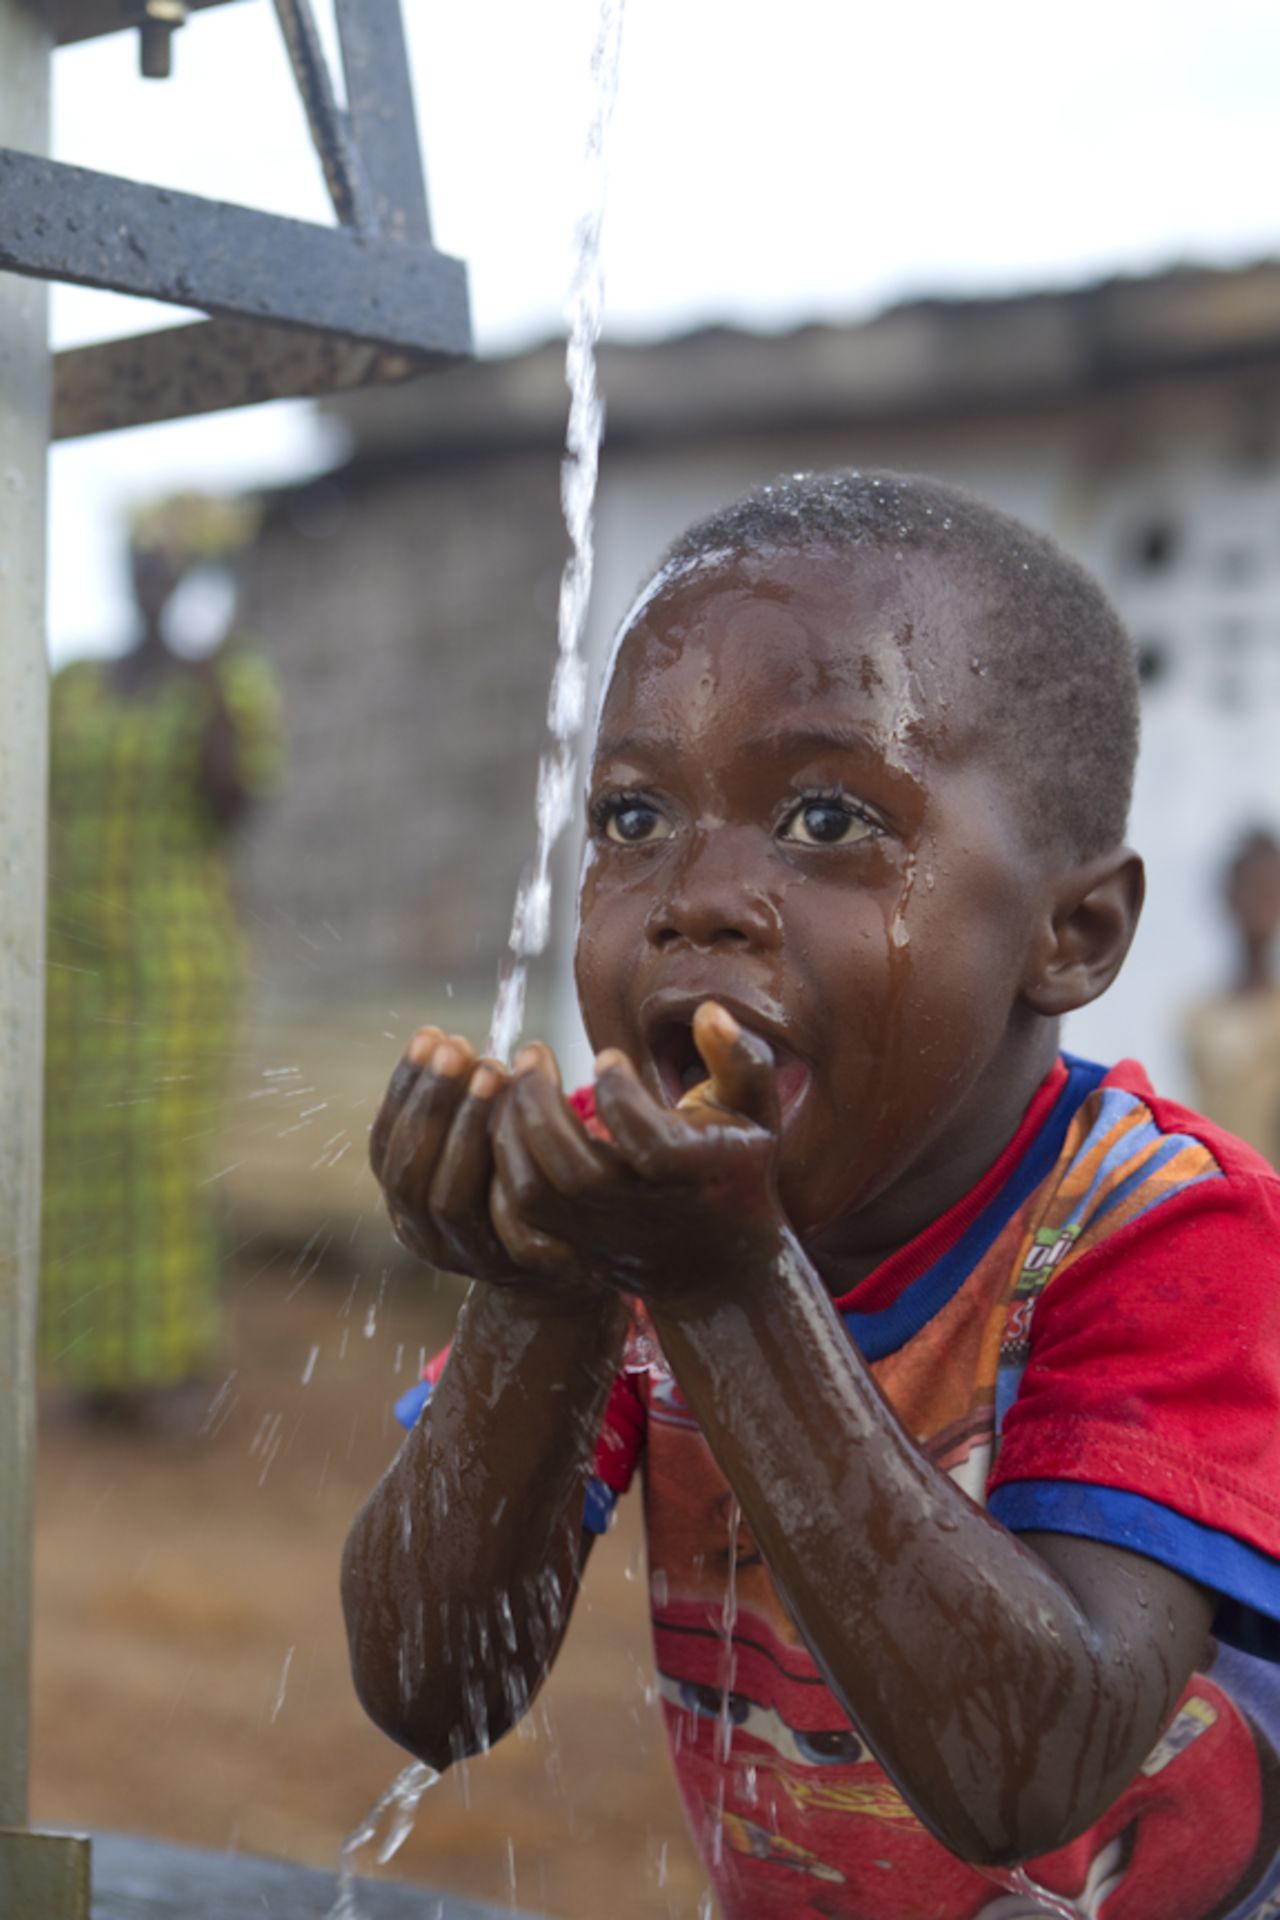 Liberia, which emerged from the wreckage of a 14-year civil war in 2003, is facing a severe water crisis. Approximately 3,000 people, more than half of which are children under the age of five, die each year from diarrhea, according to World Bank figures.